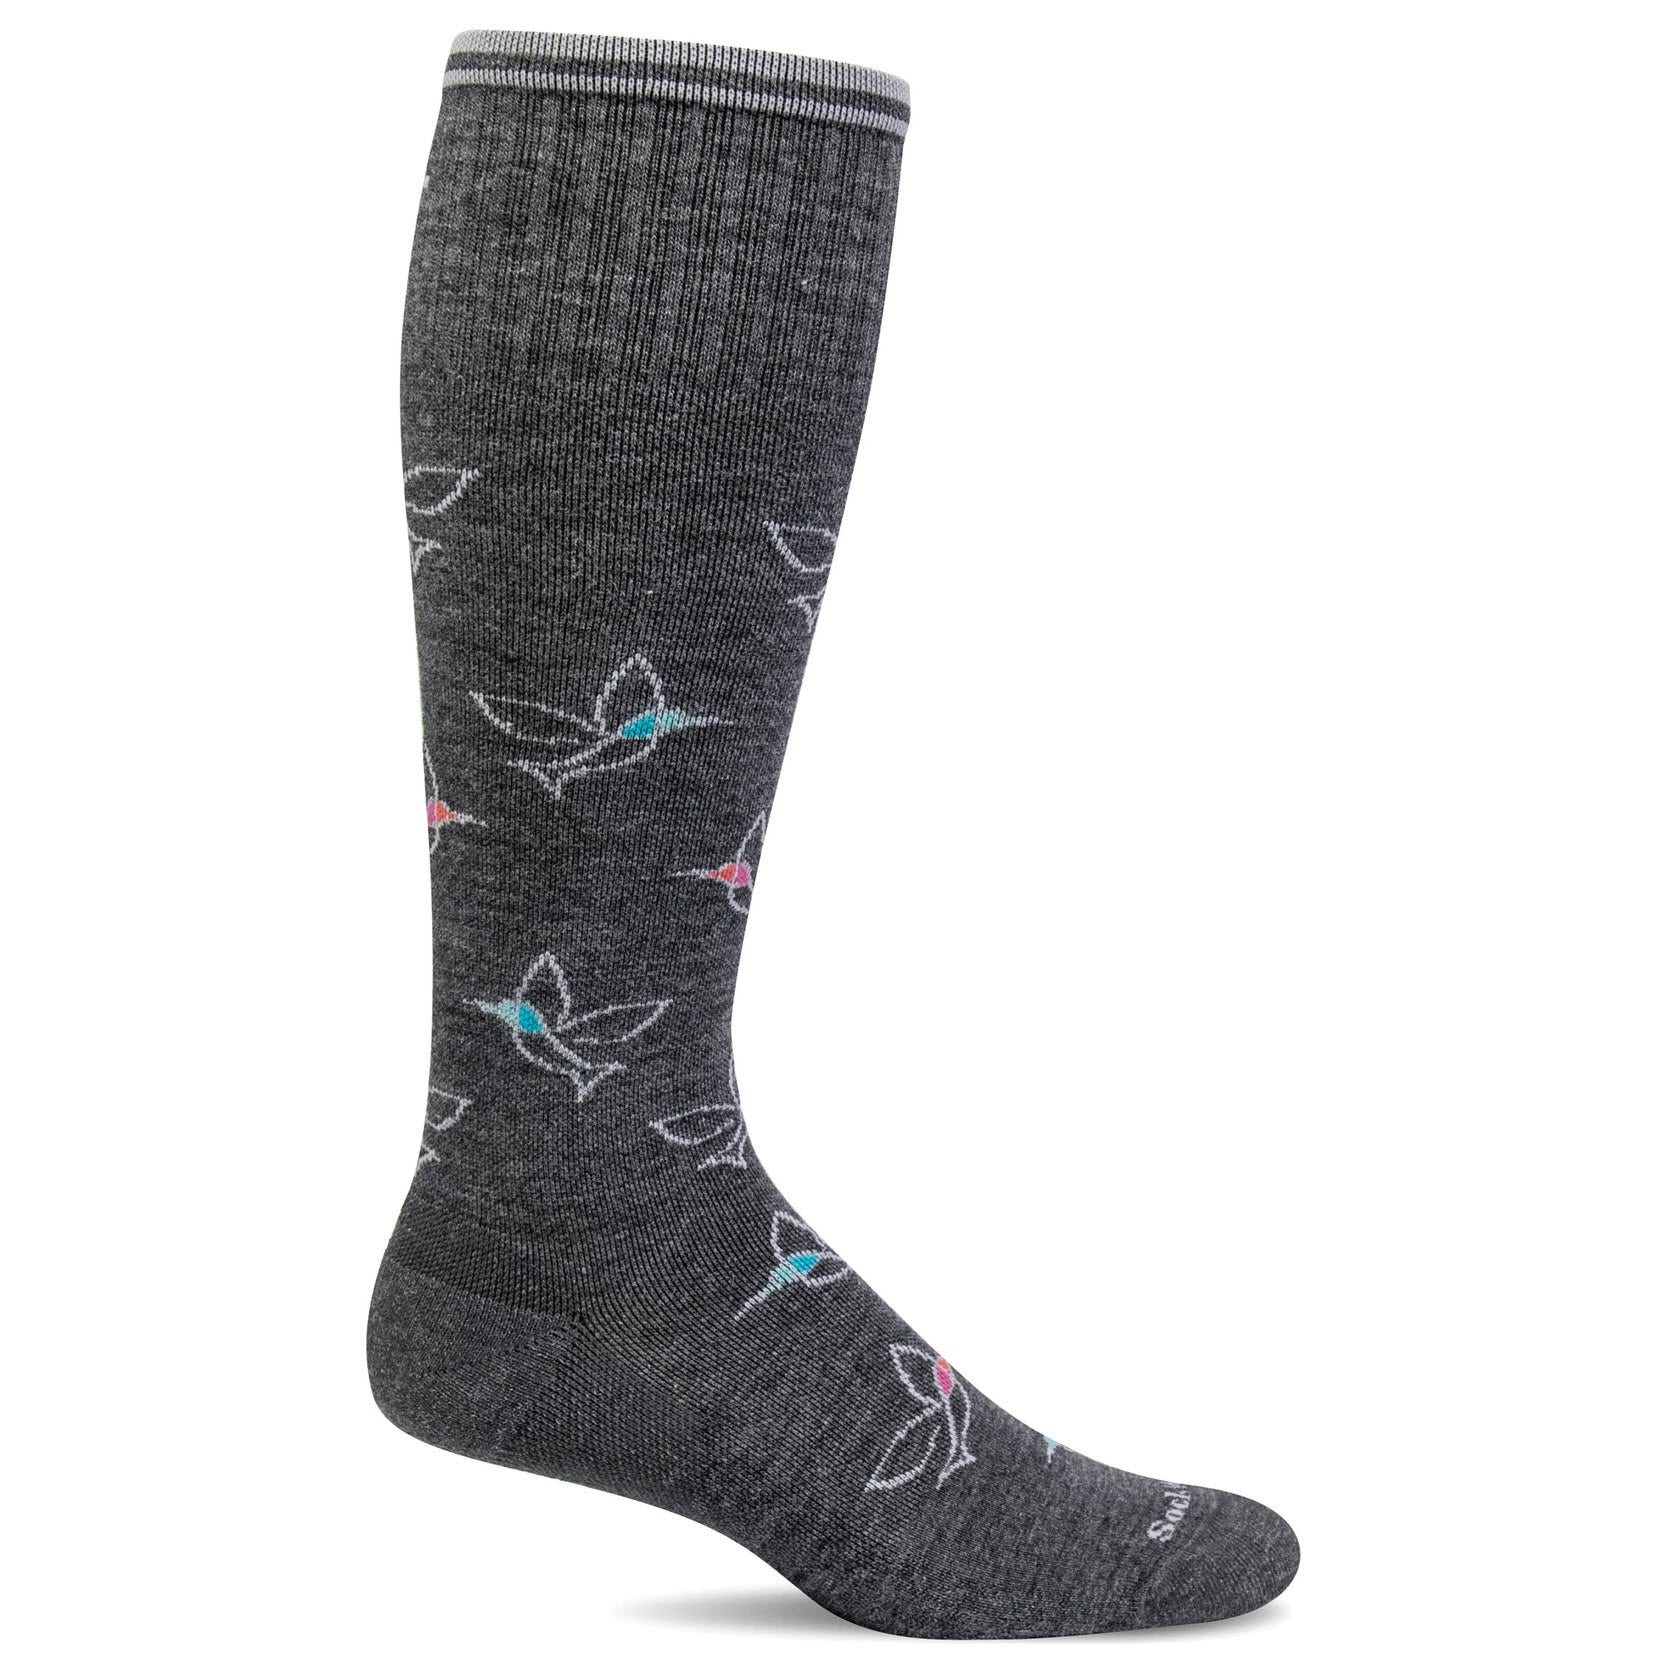 A single gray Sockwell Bamboo Rayon knee-high sock with a pattern of colorful butterflies displayed against a white background.